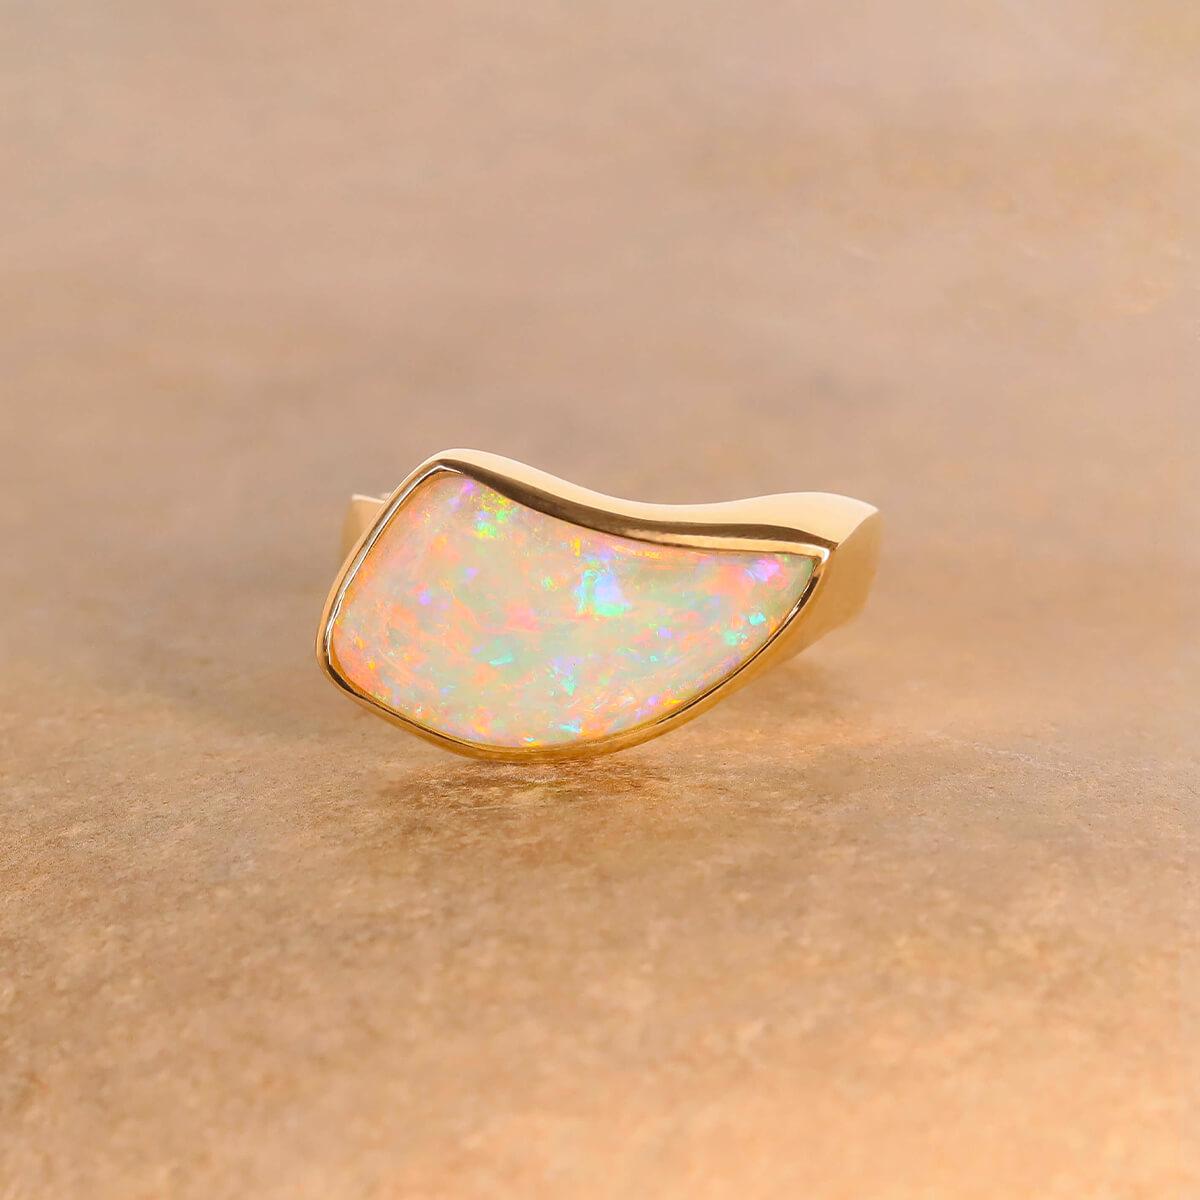 A beauty in its own category, this stunning light opal ring features an opalised shell fossil. This shell once lived on the edges of an inland sea in Central Australia. Over 100 million years the shell has become a solid opal in one of nature's true